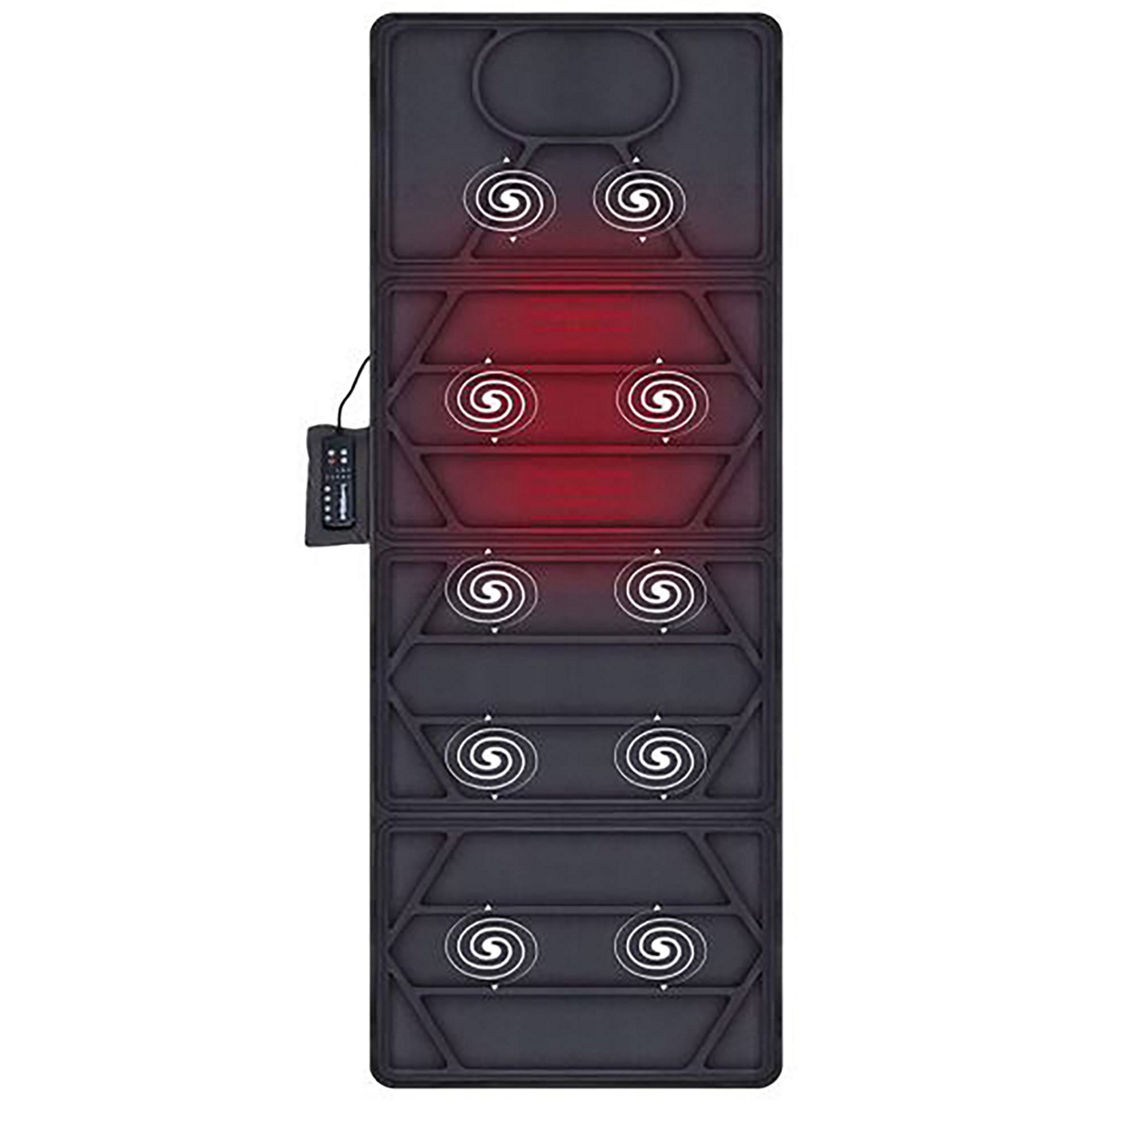 PURSONIC Luxury Massage Mat with Soothing Heat - 10 Powerful Motors - Image 5 of 5